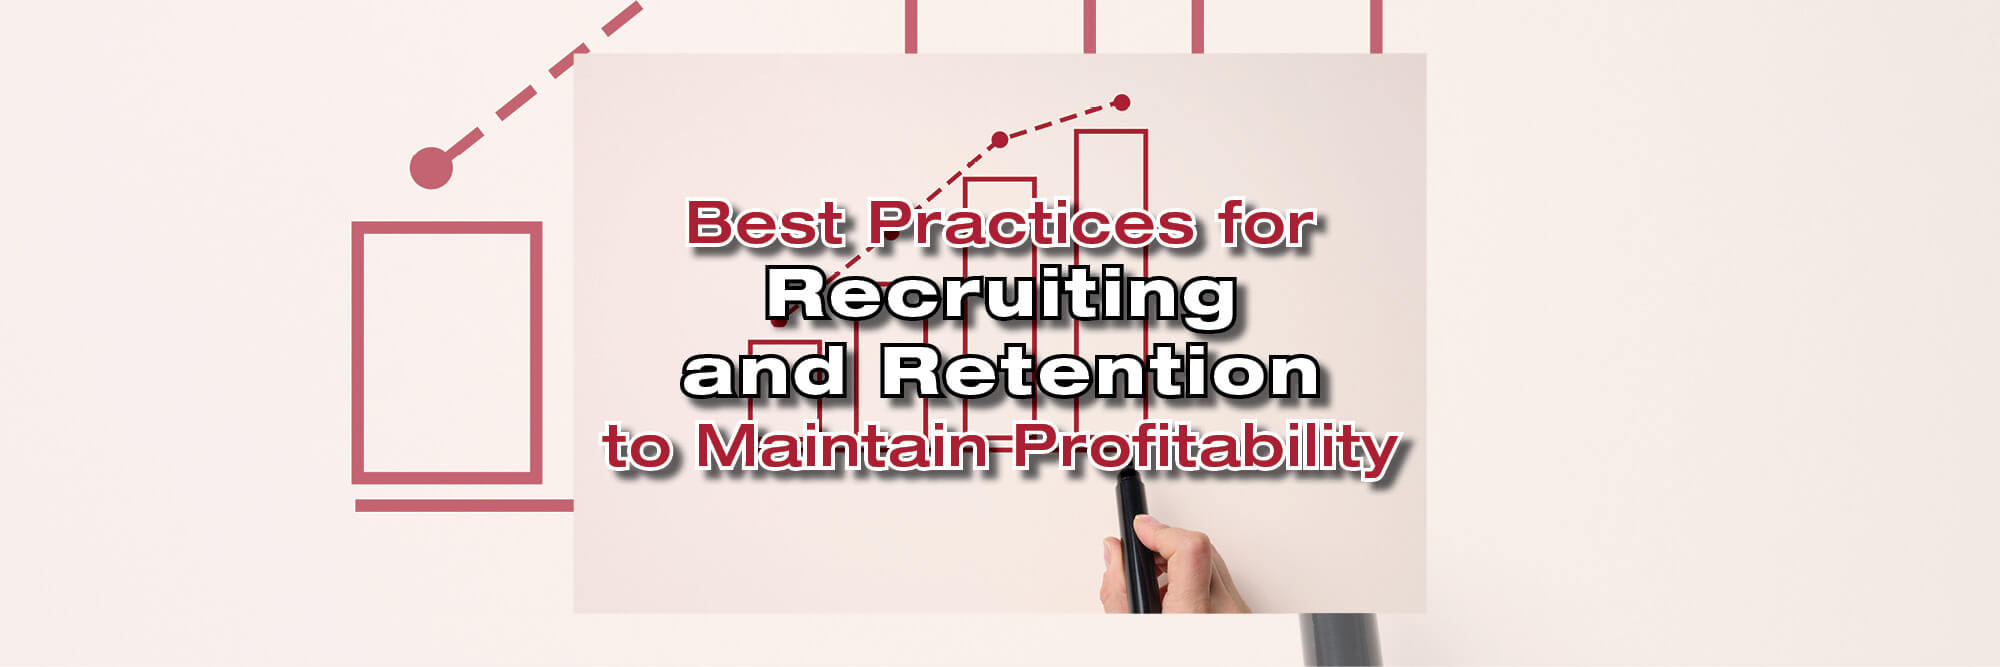 Recruiting and Retention Practices to Maintain Profitability